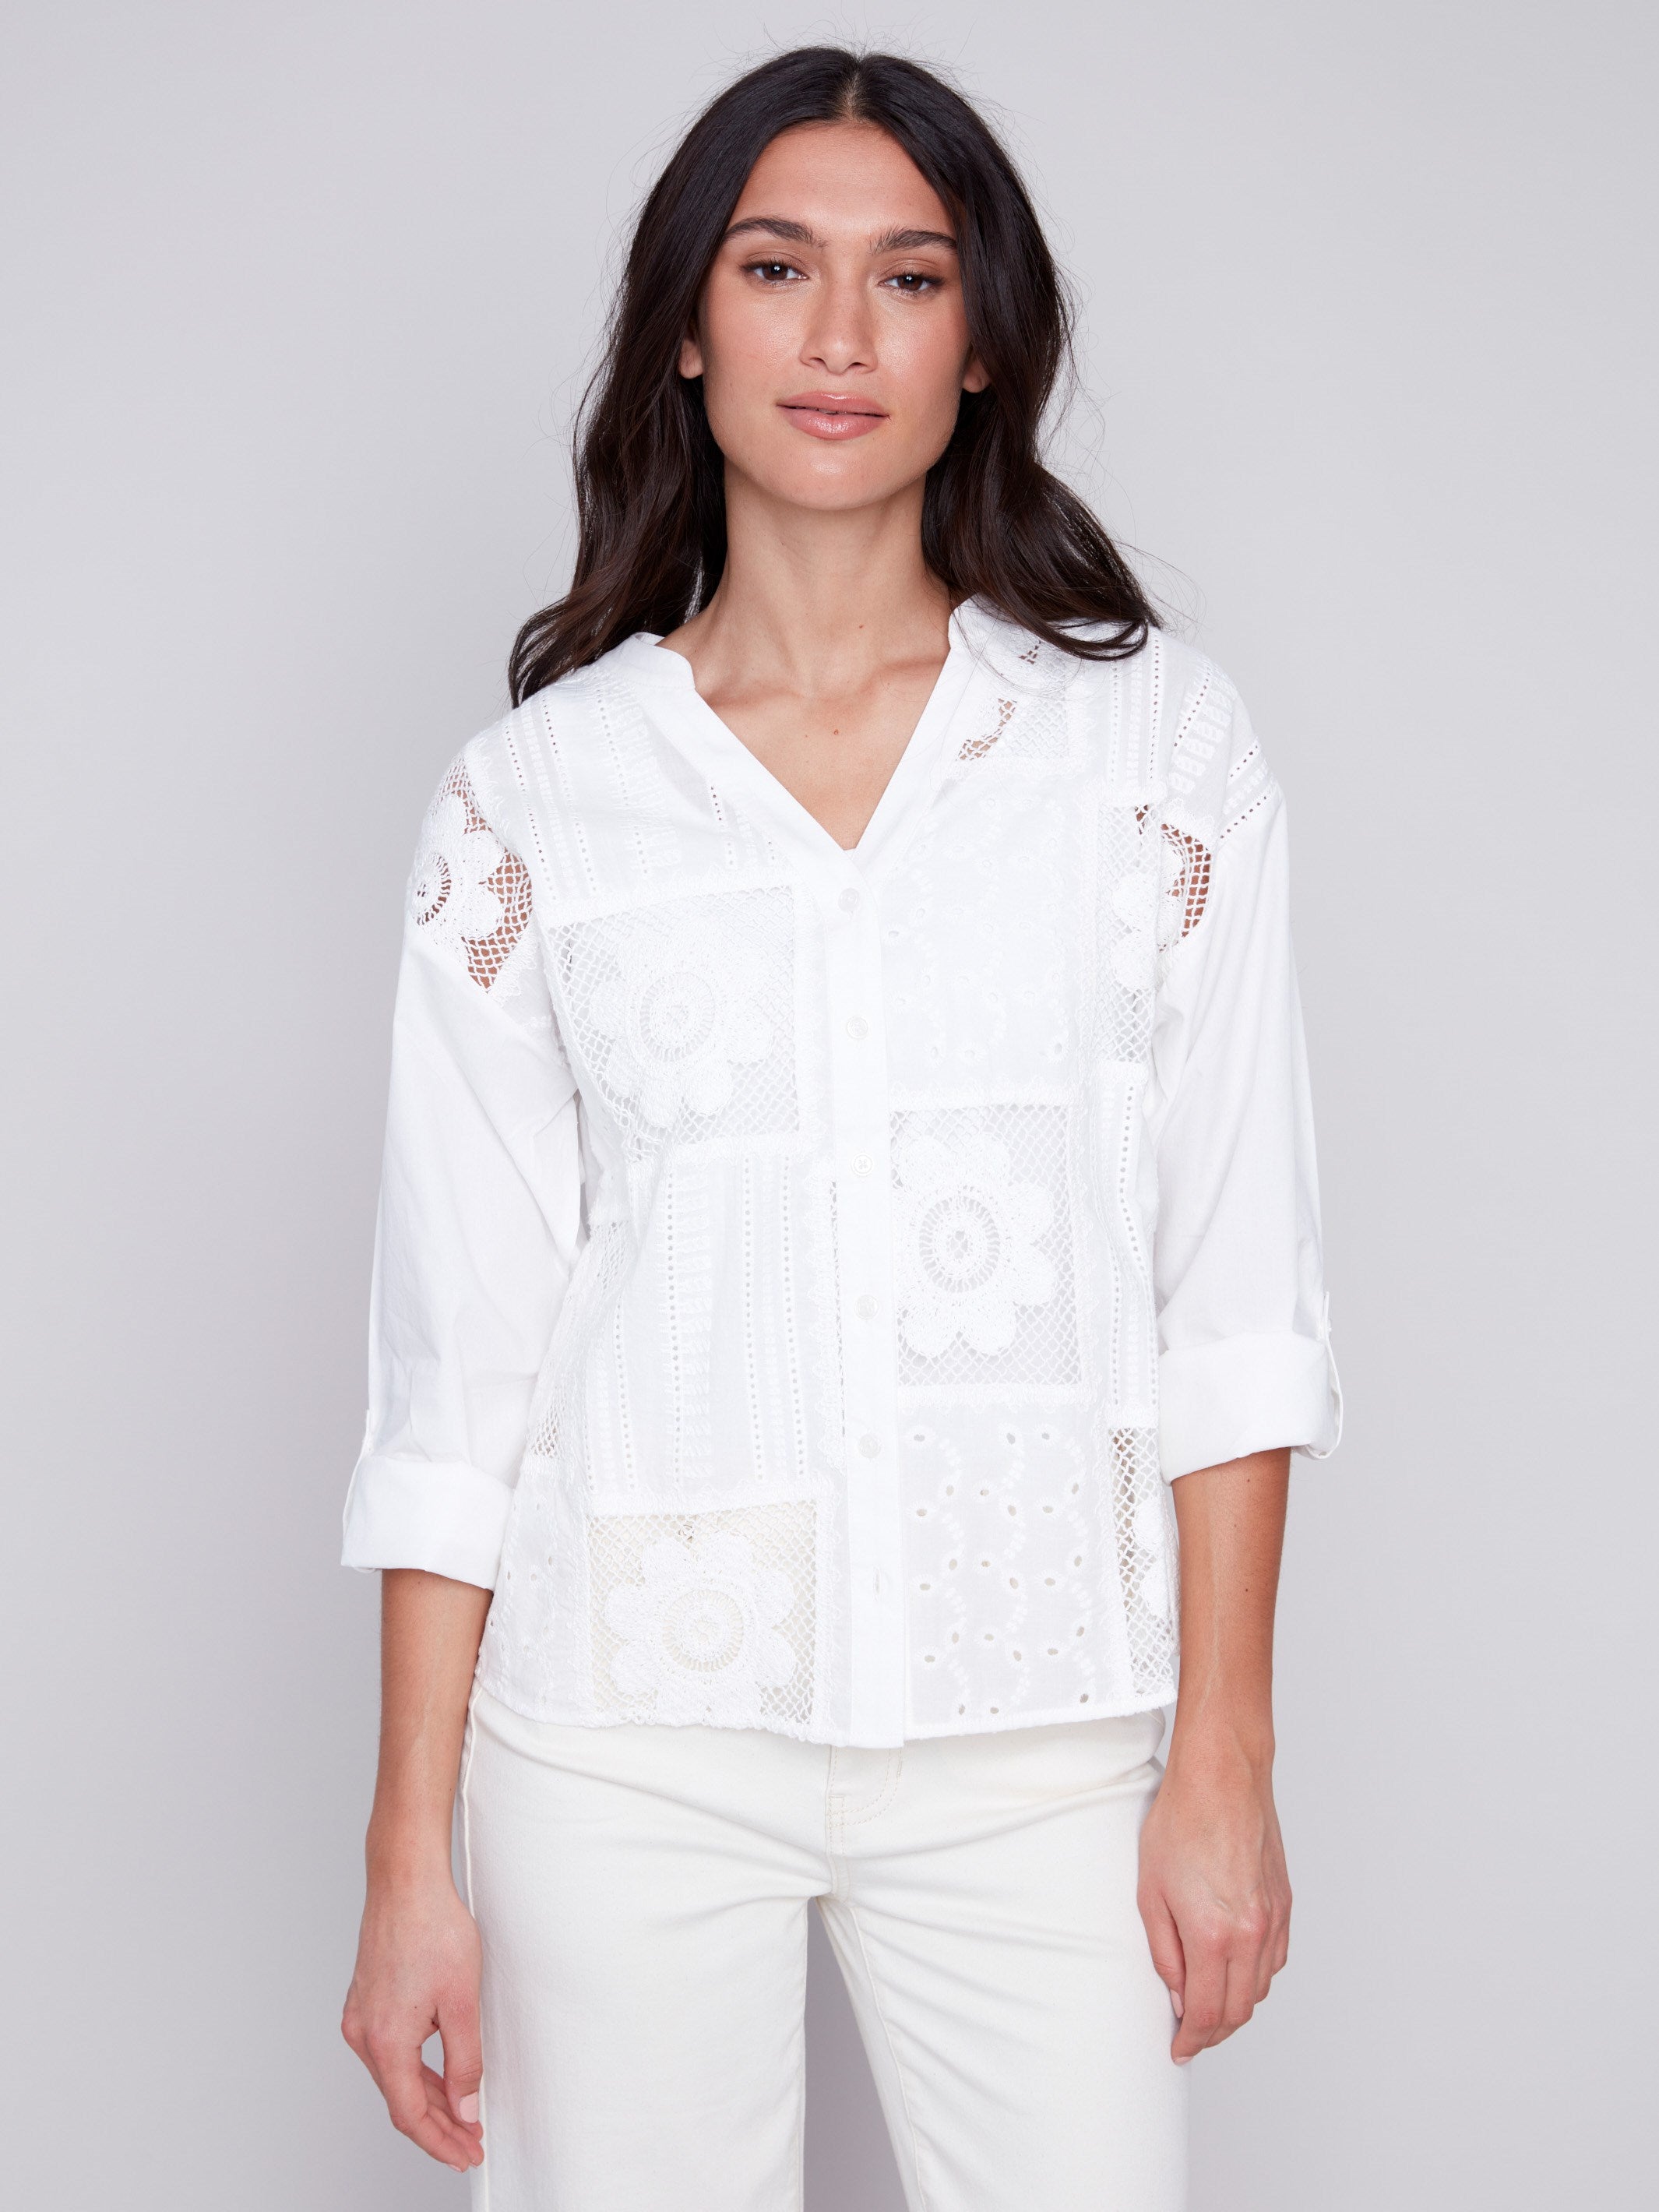 Cotton Eyelet Shirt - White - Charlie B Collection Canada - Image 1